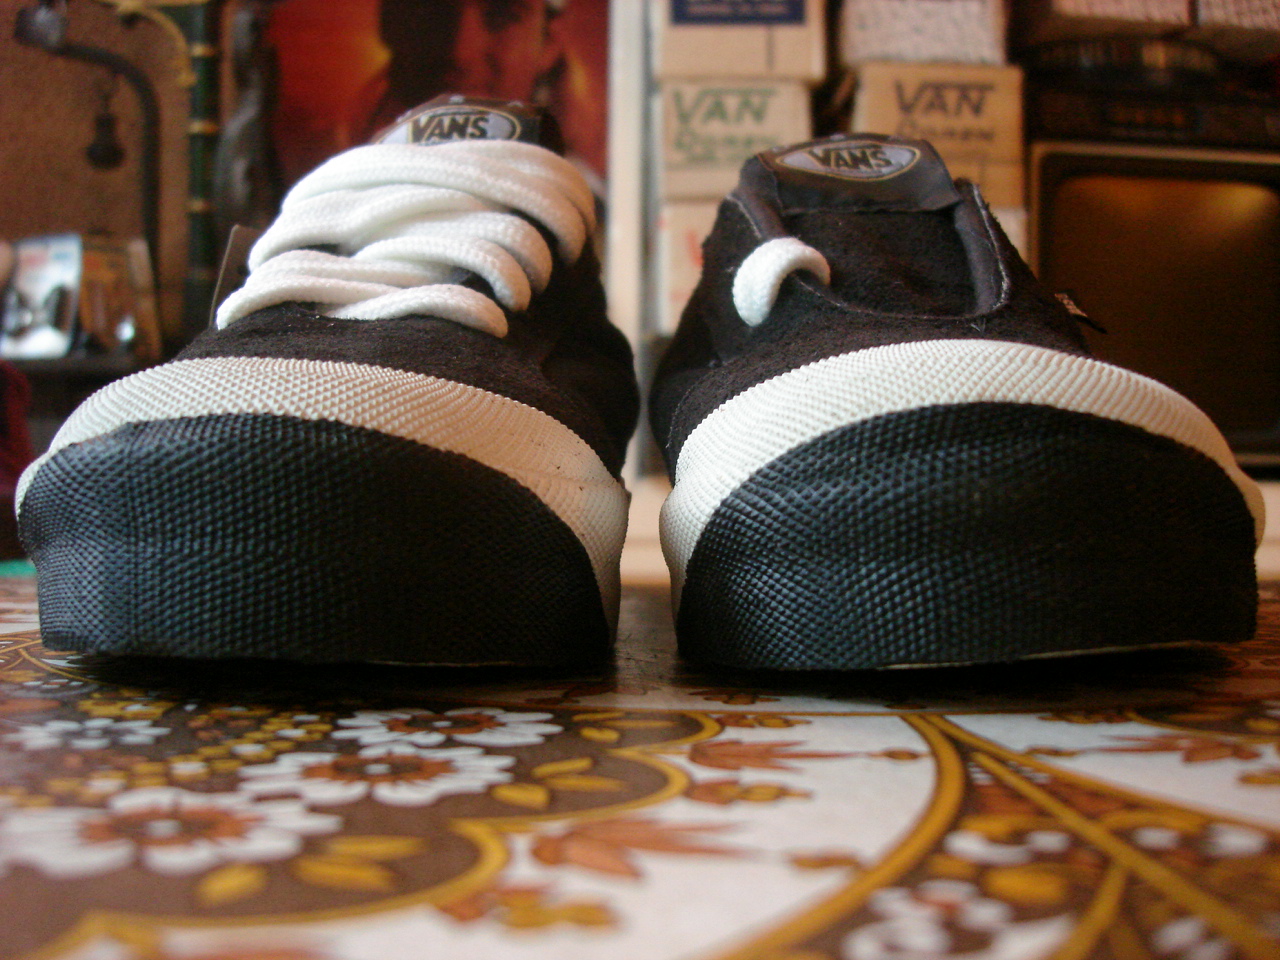 theothersideofthepillow: TOE JAMS; vintage VANS toe MADE IN USA 1994 US6.5